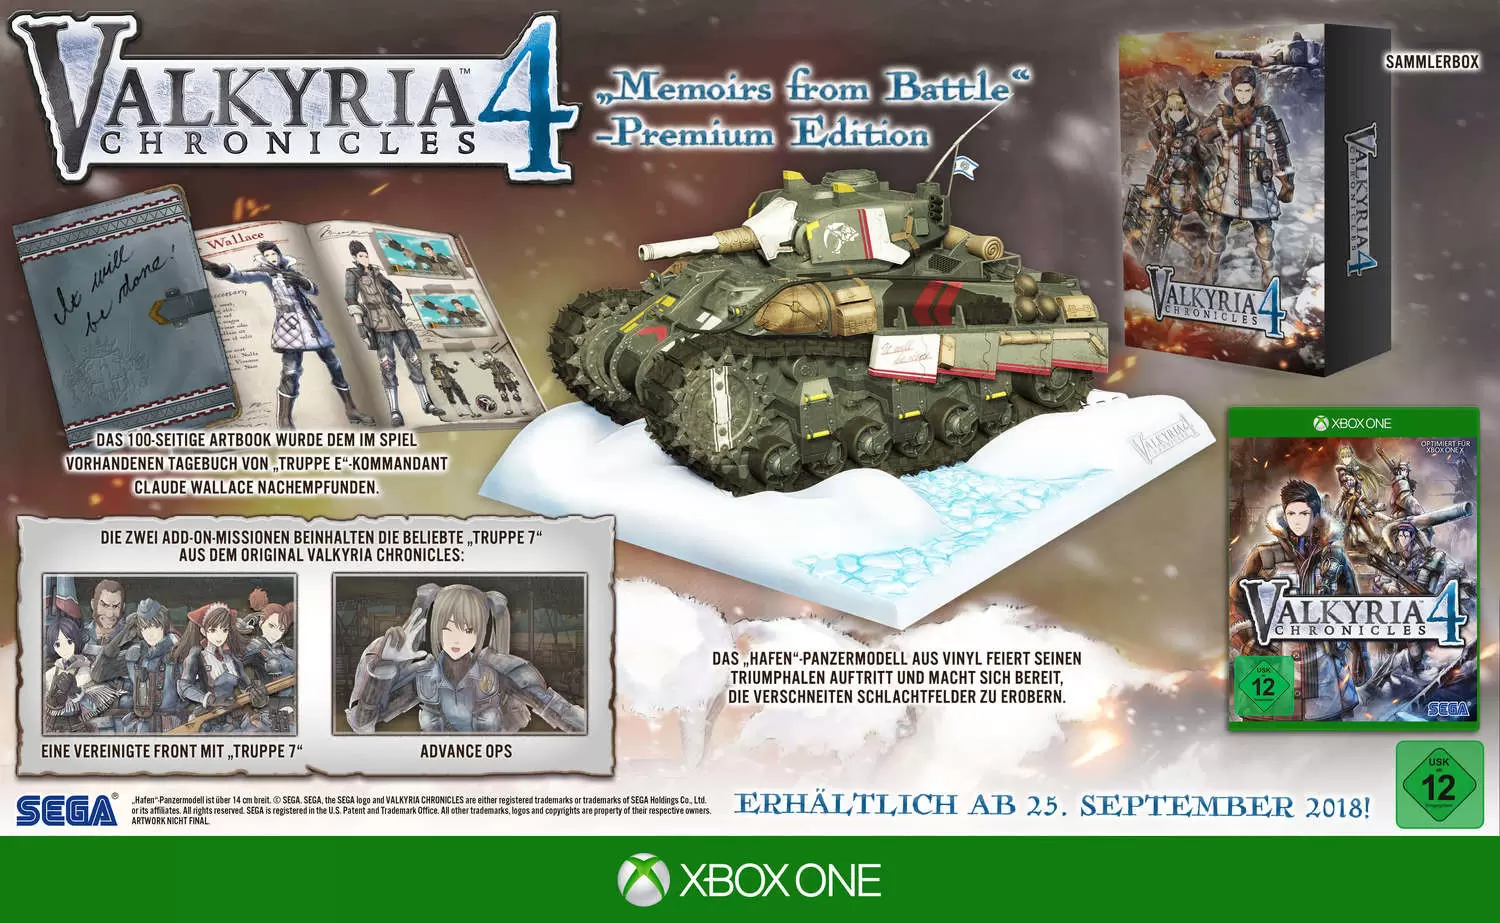 XBOX One Games - Valkyria Chronicles 4 - Memoirs From Battle Premium Edition